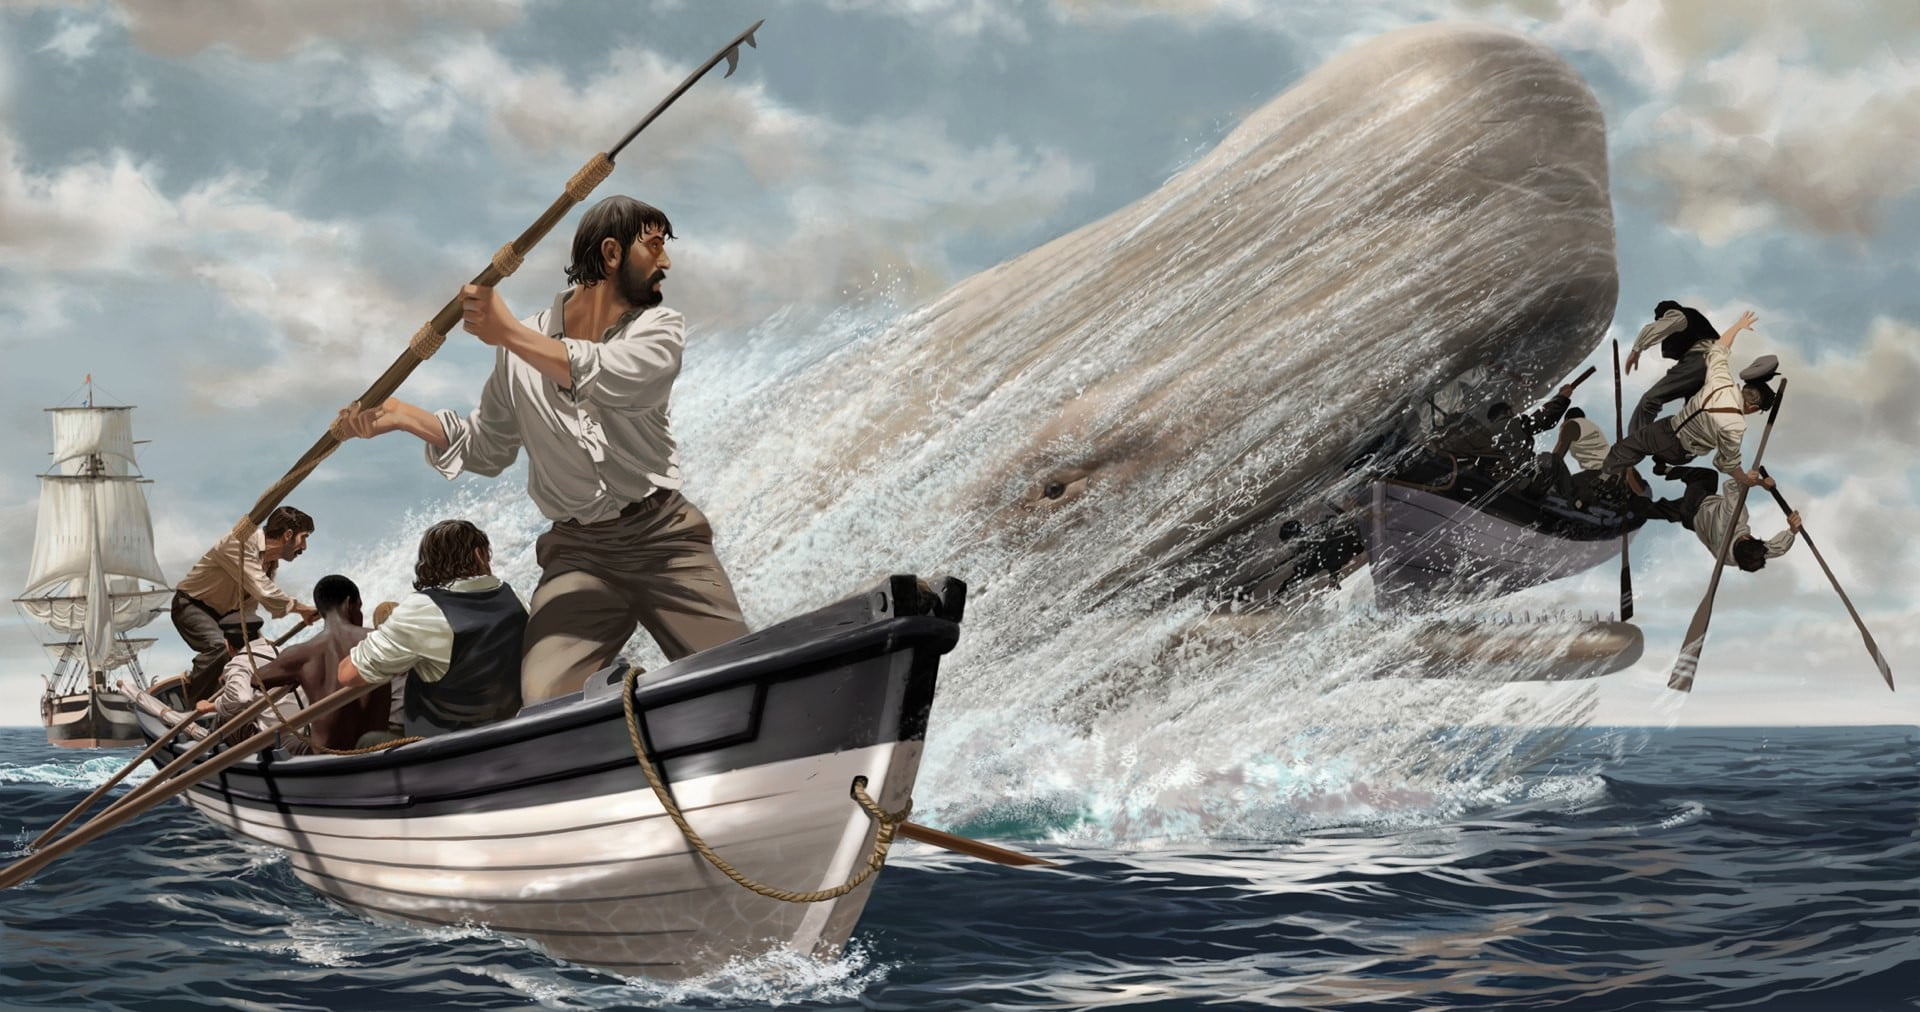 Moby dick fishing